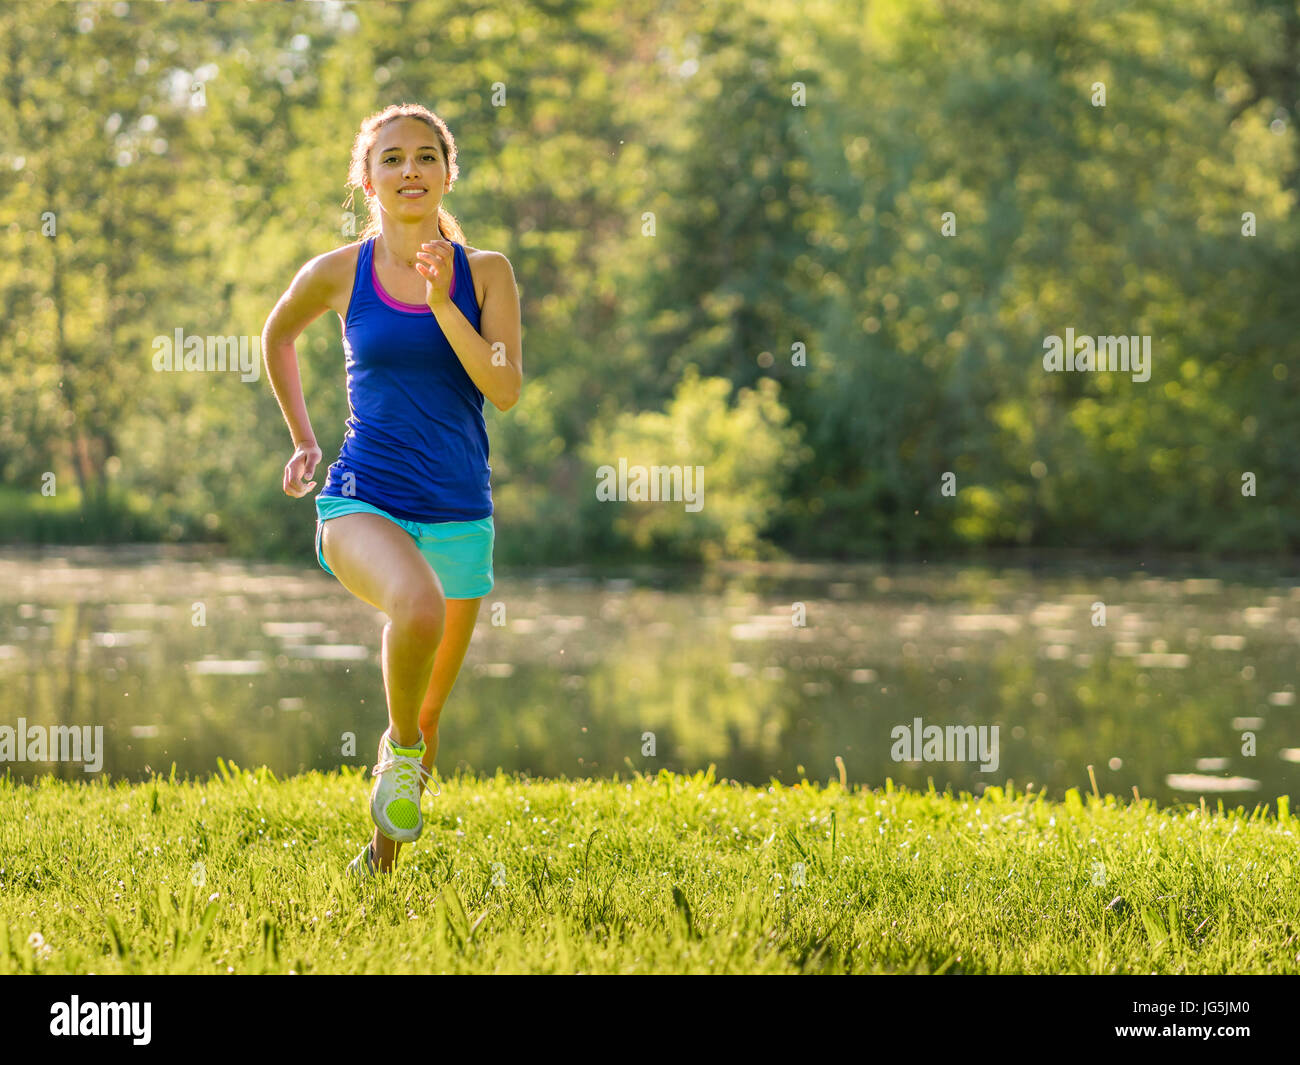 Woman during fitness training, running, slim, athletic, Talaue Waiblingen, Baden-Württemberg, Germany Stock Photo